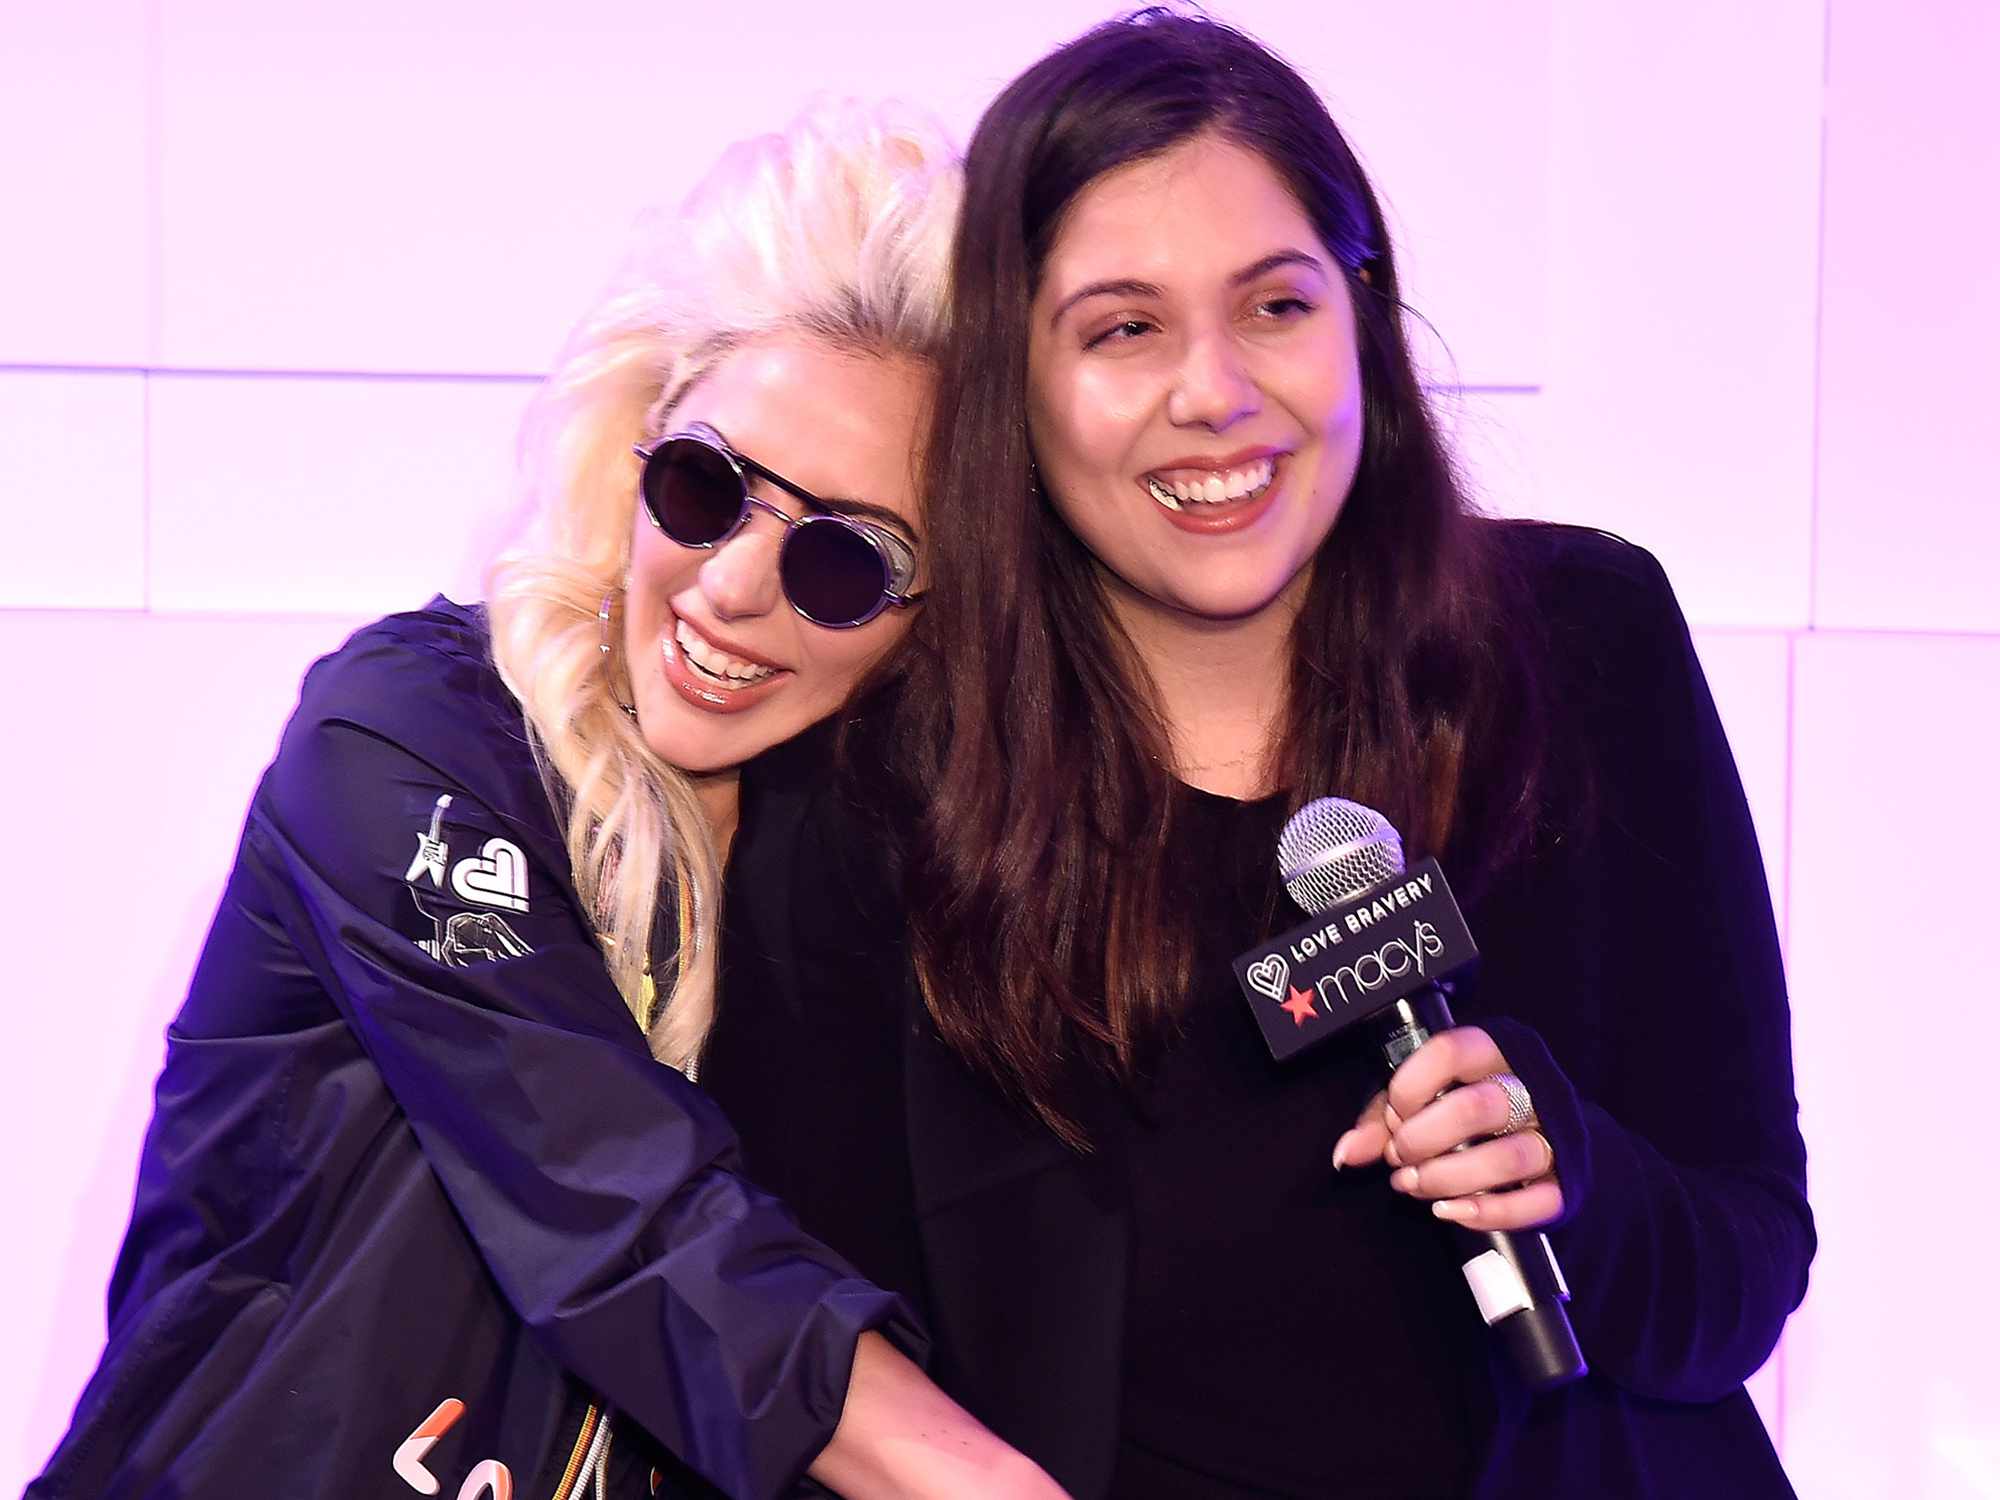 Lady Gaga and Natali Germanotta at the launch of "Bravery" by Lady Gaga and Elton John at Macy's Herald Square on May 4, 2016.